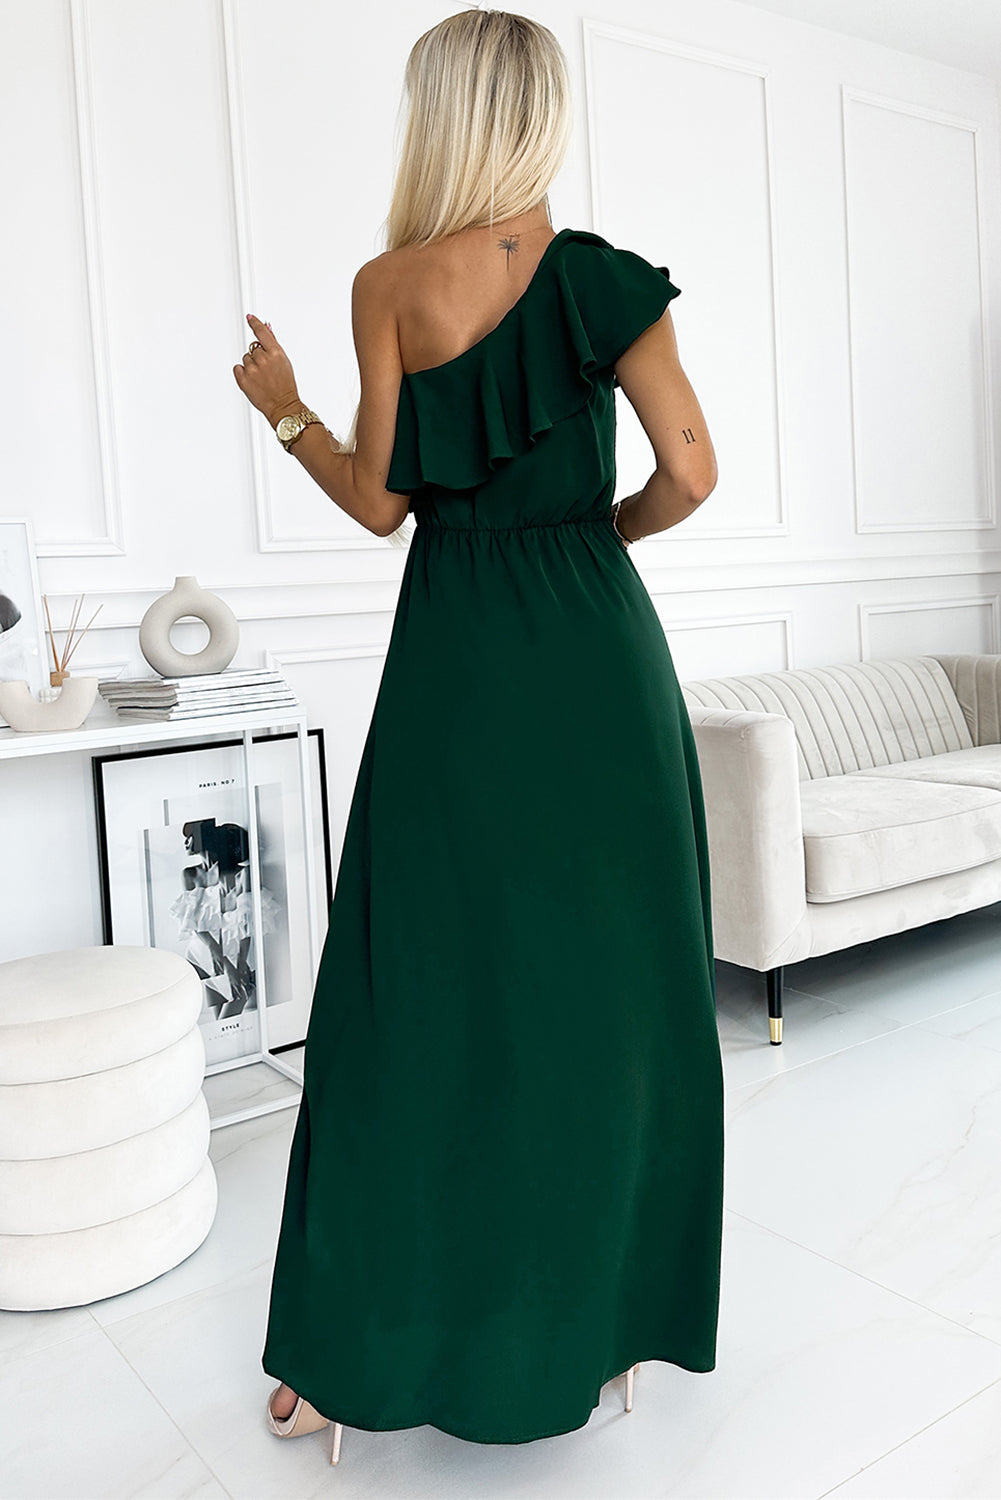 Stunning One-Shoulder Ruffled Maxi Dress: Perfect Black Tie Summer Attire for Wedding Guests, Elegant & Chic